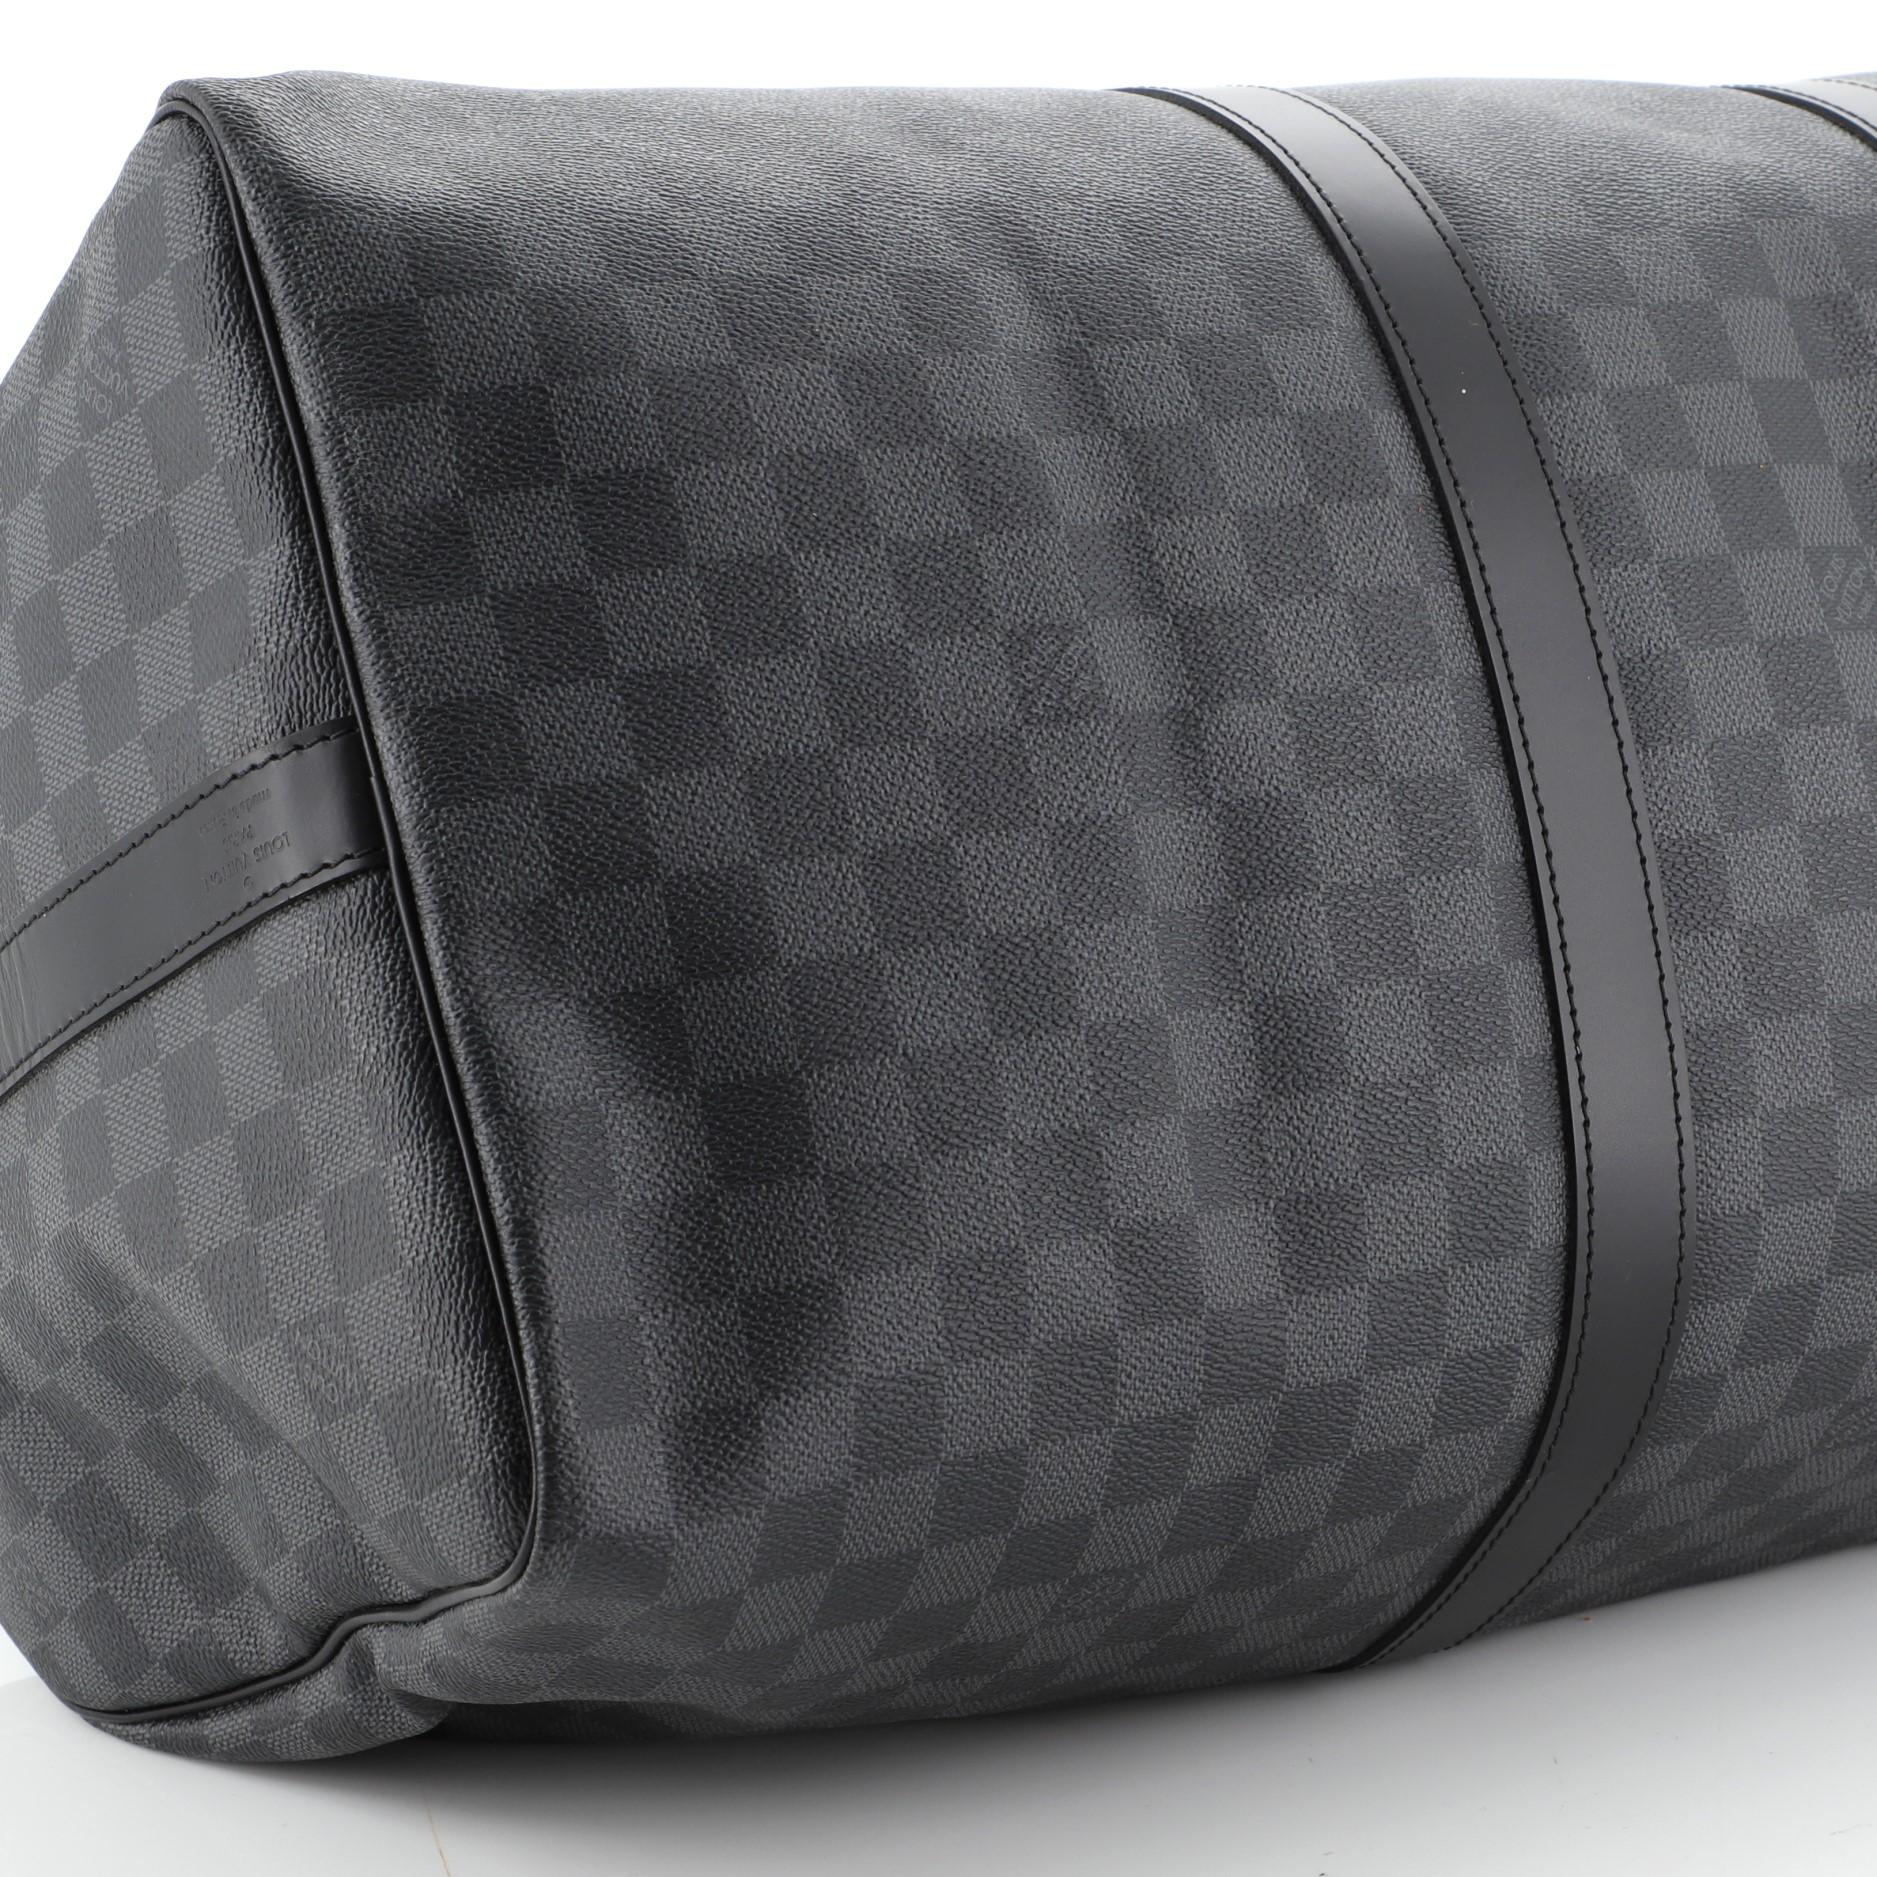 Keepall Bandouliere Bag Damier Graphite 55 1